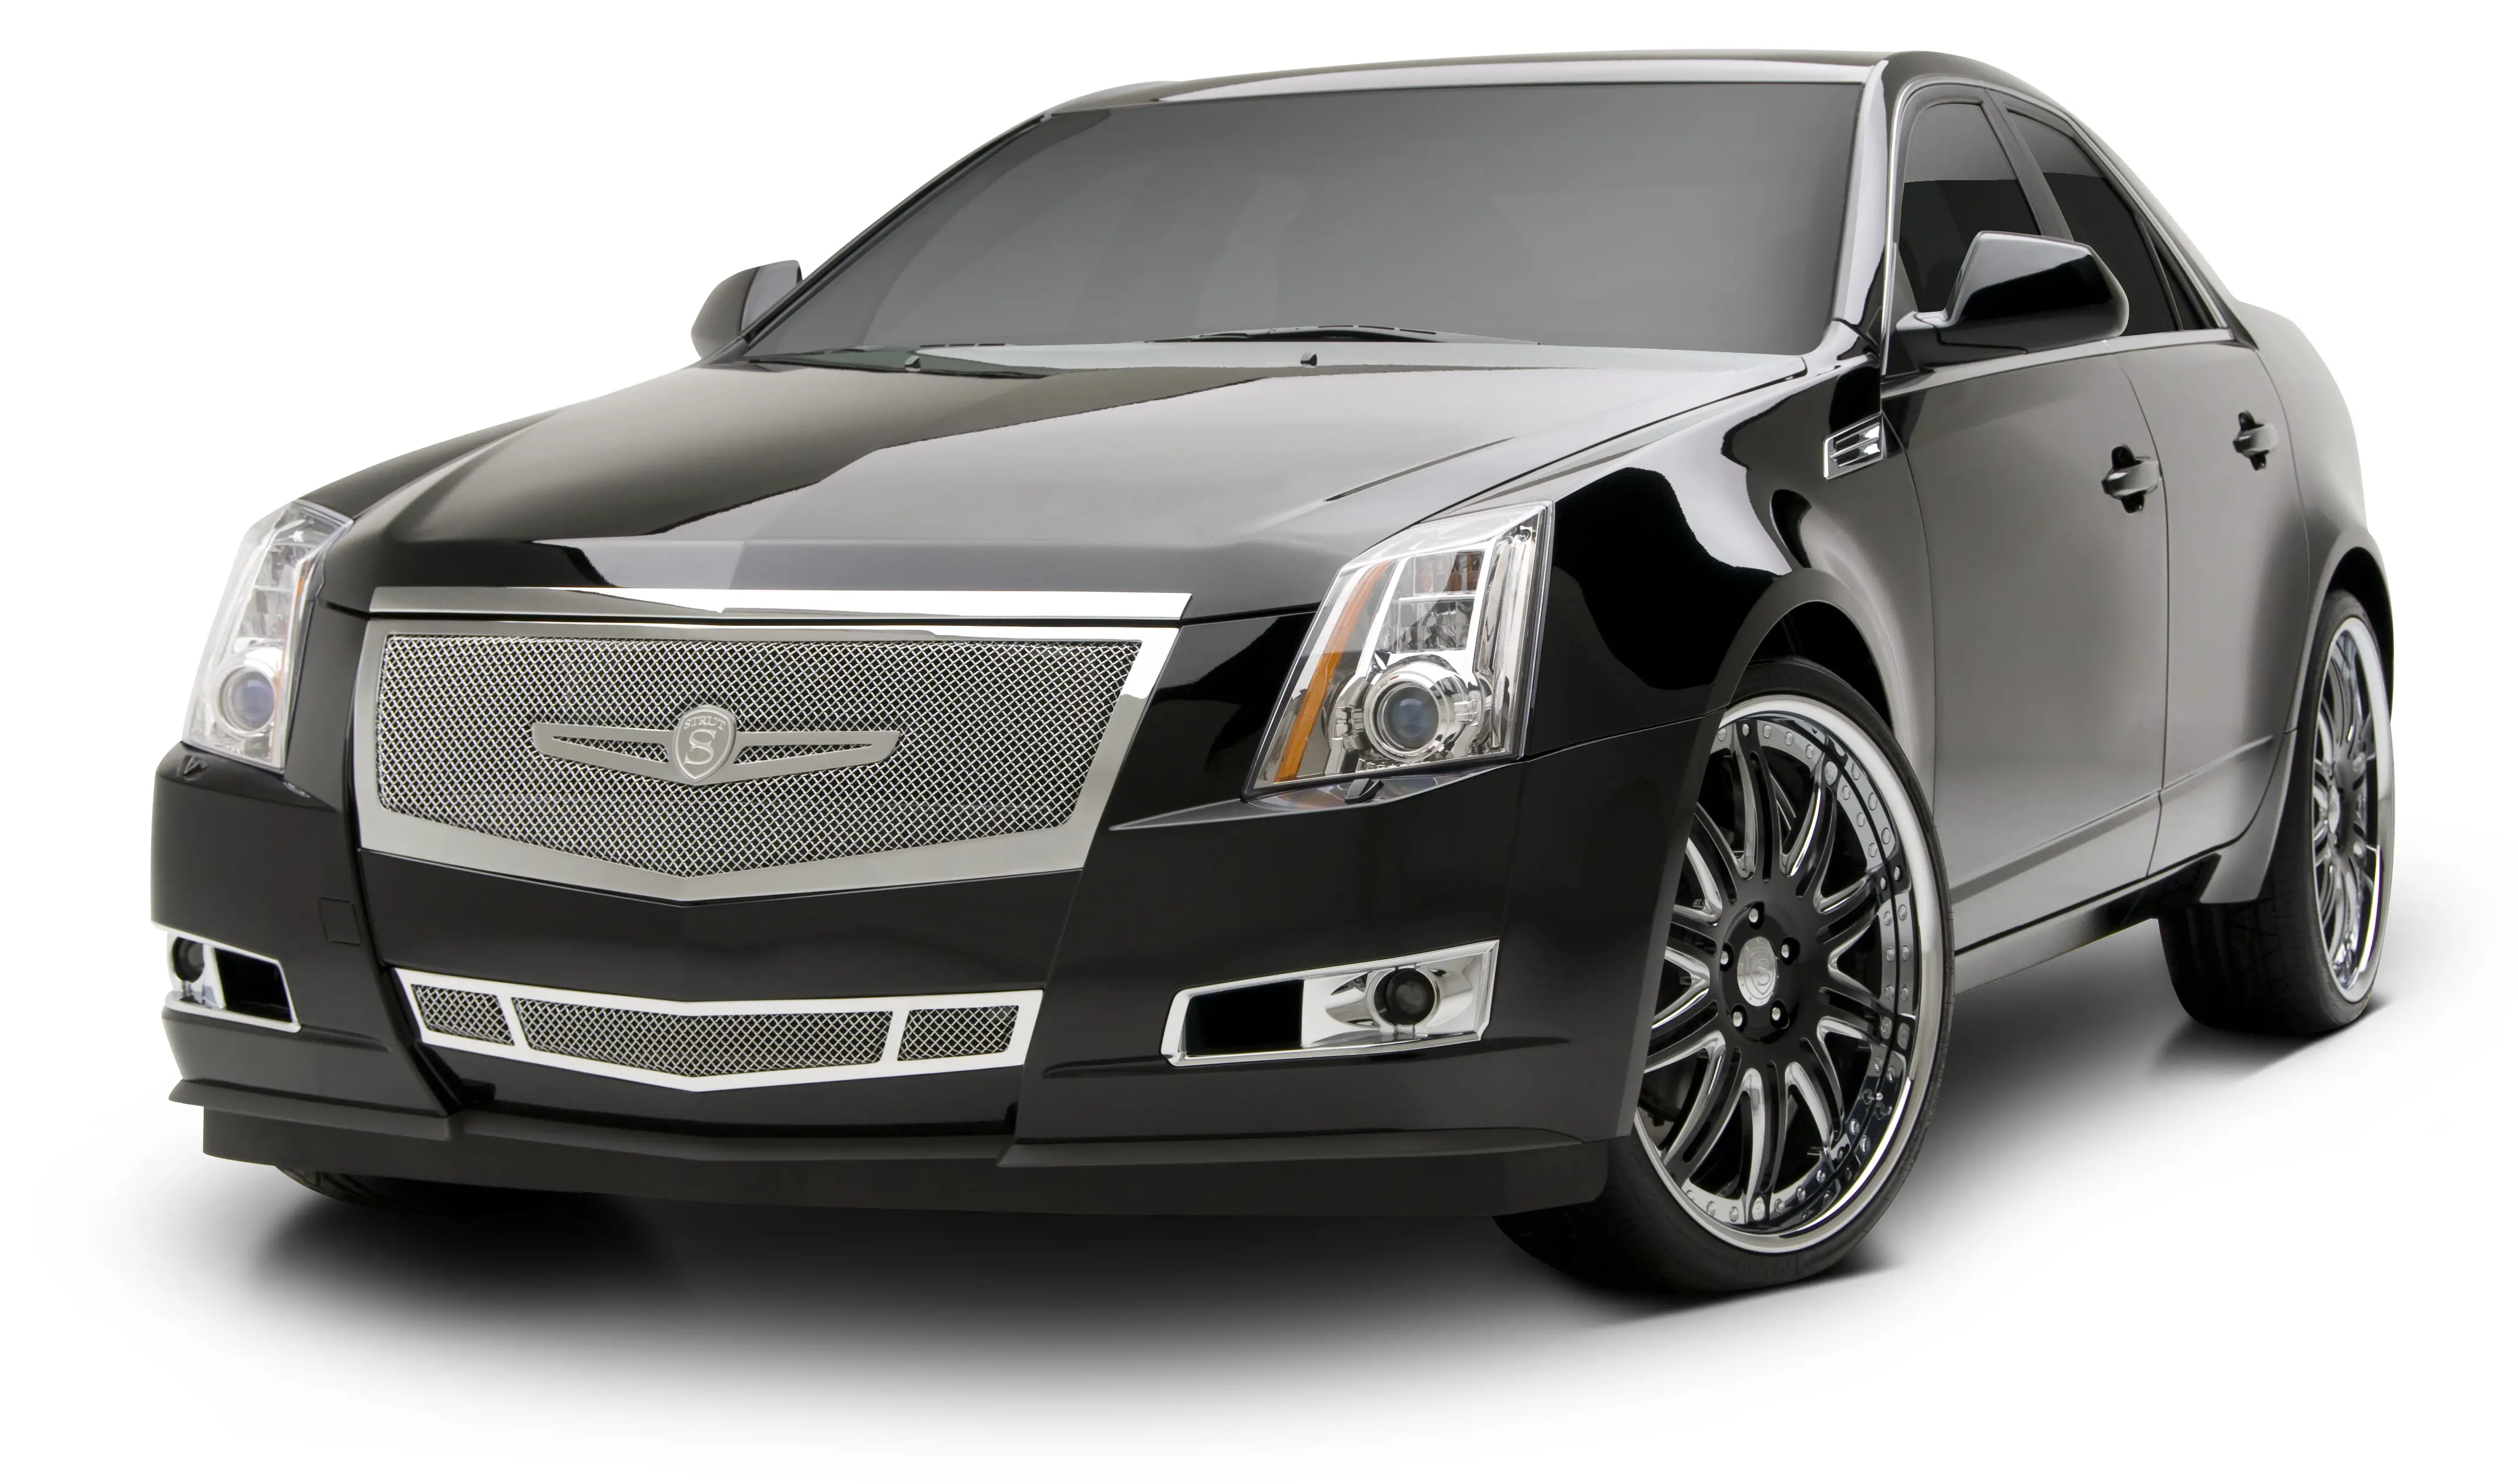 STRUT Introduces Custom Cadillac CTS Grille Collection